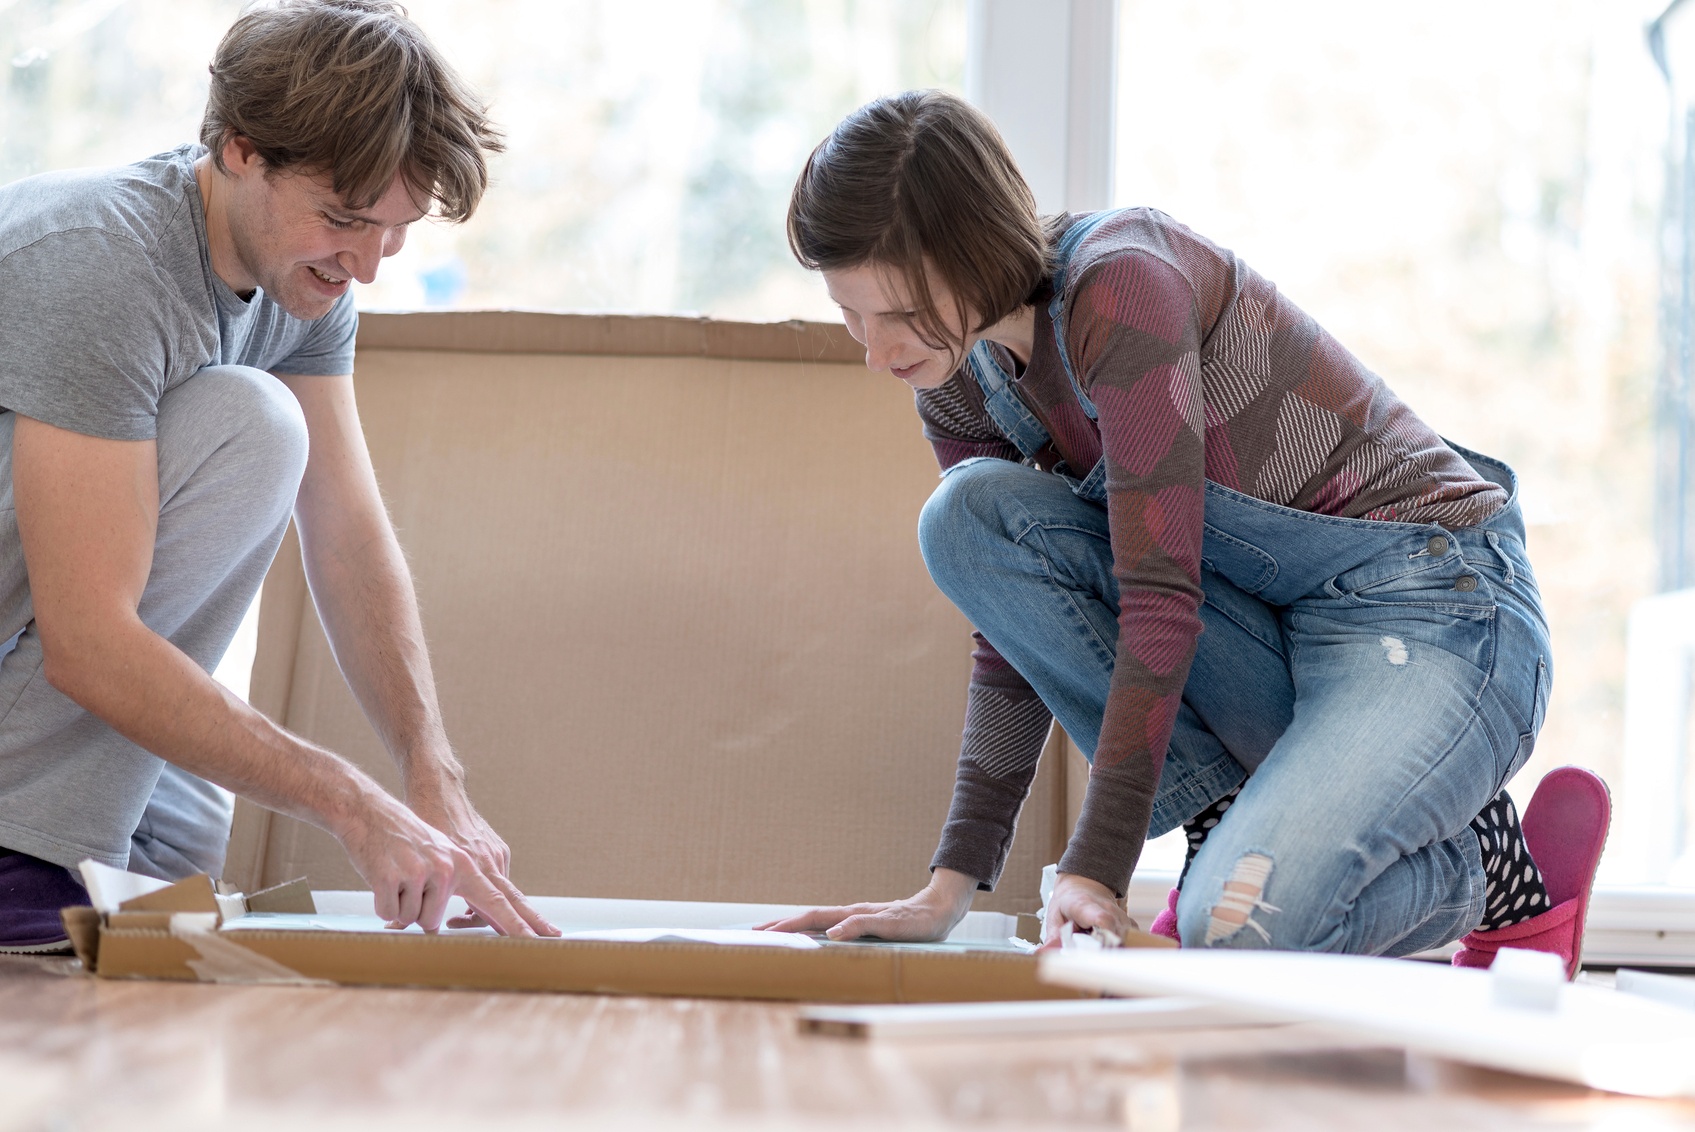 5 Things to think about before you renovate